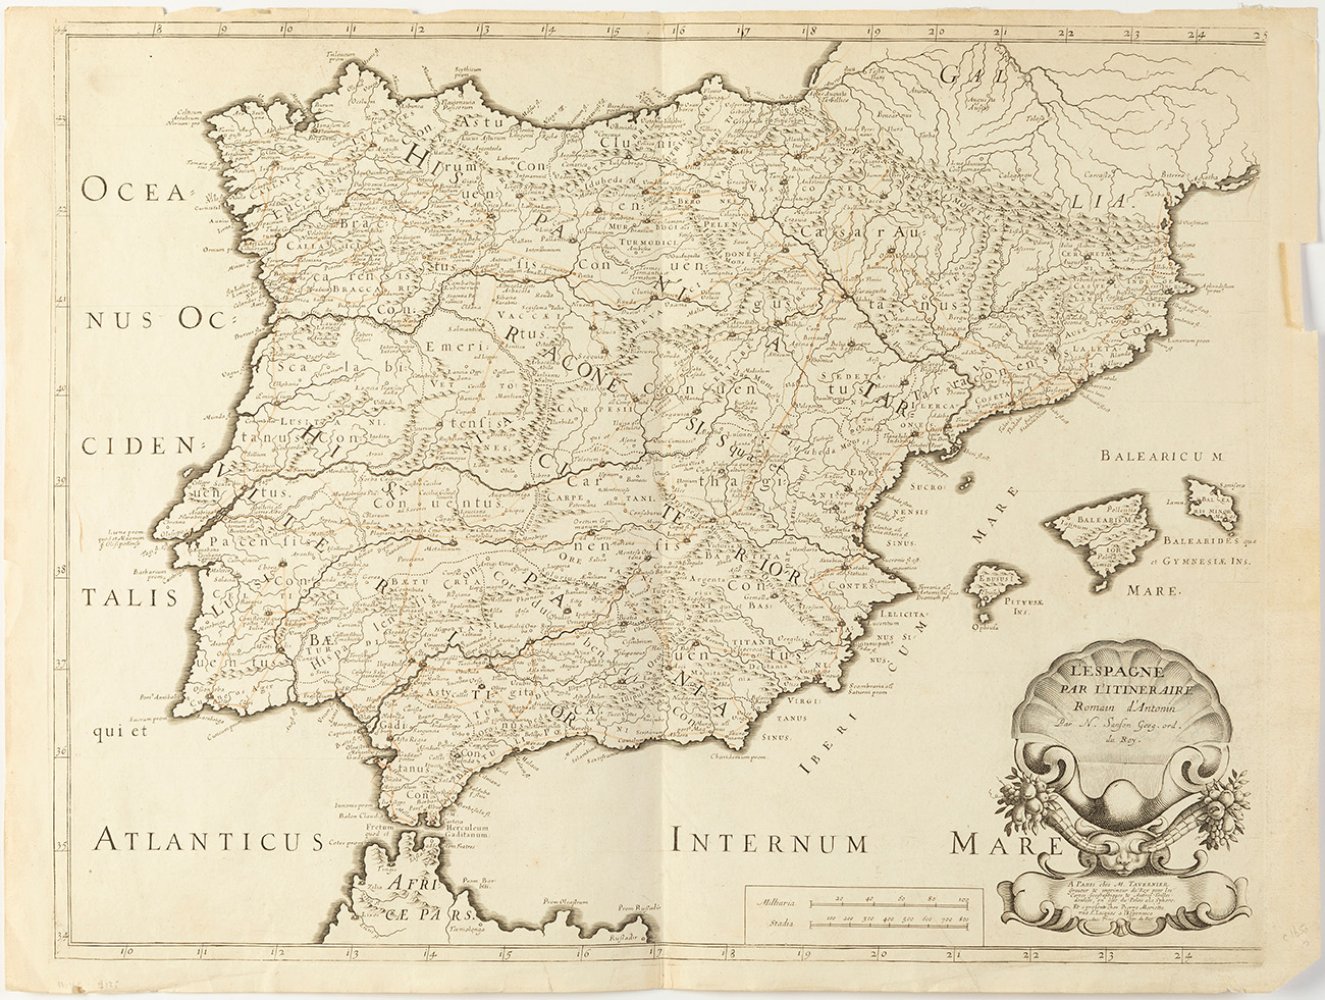 Map of Spain along the Roman itinerary of Antoninus. France, 18th century. Engraving on paper.Made